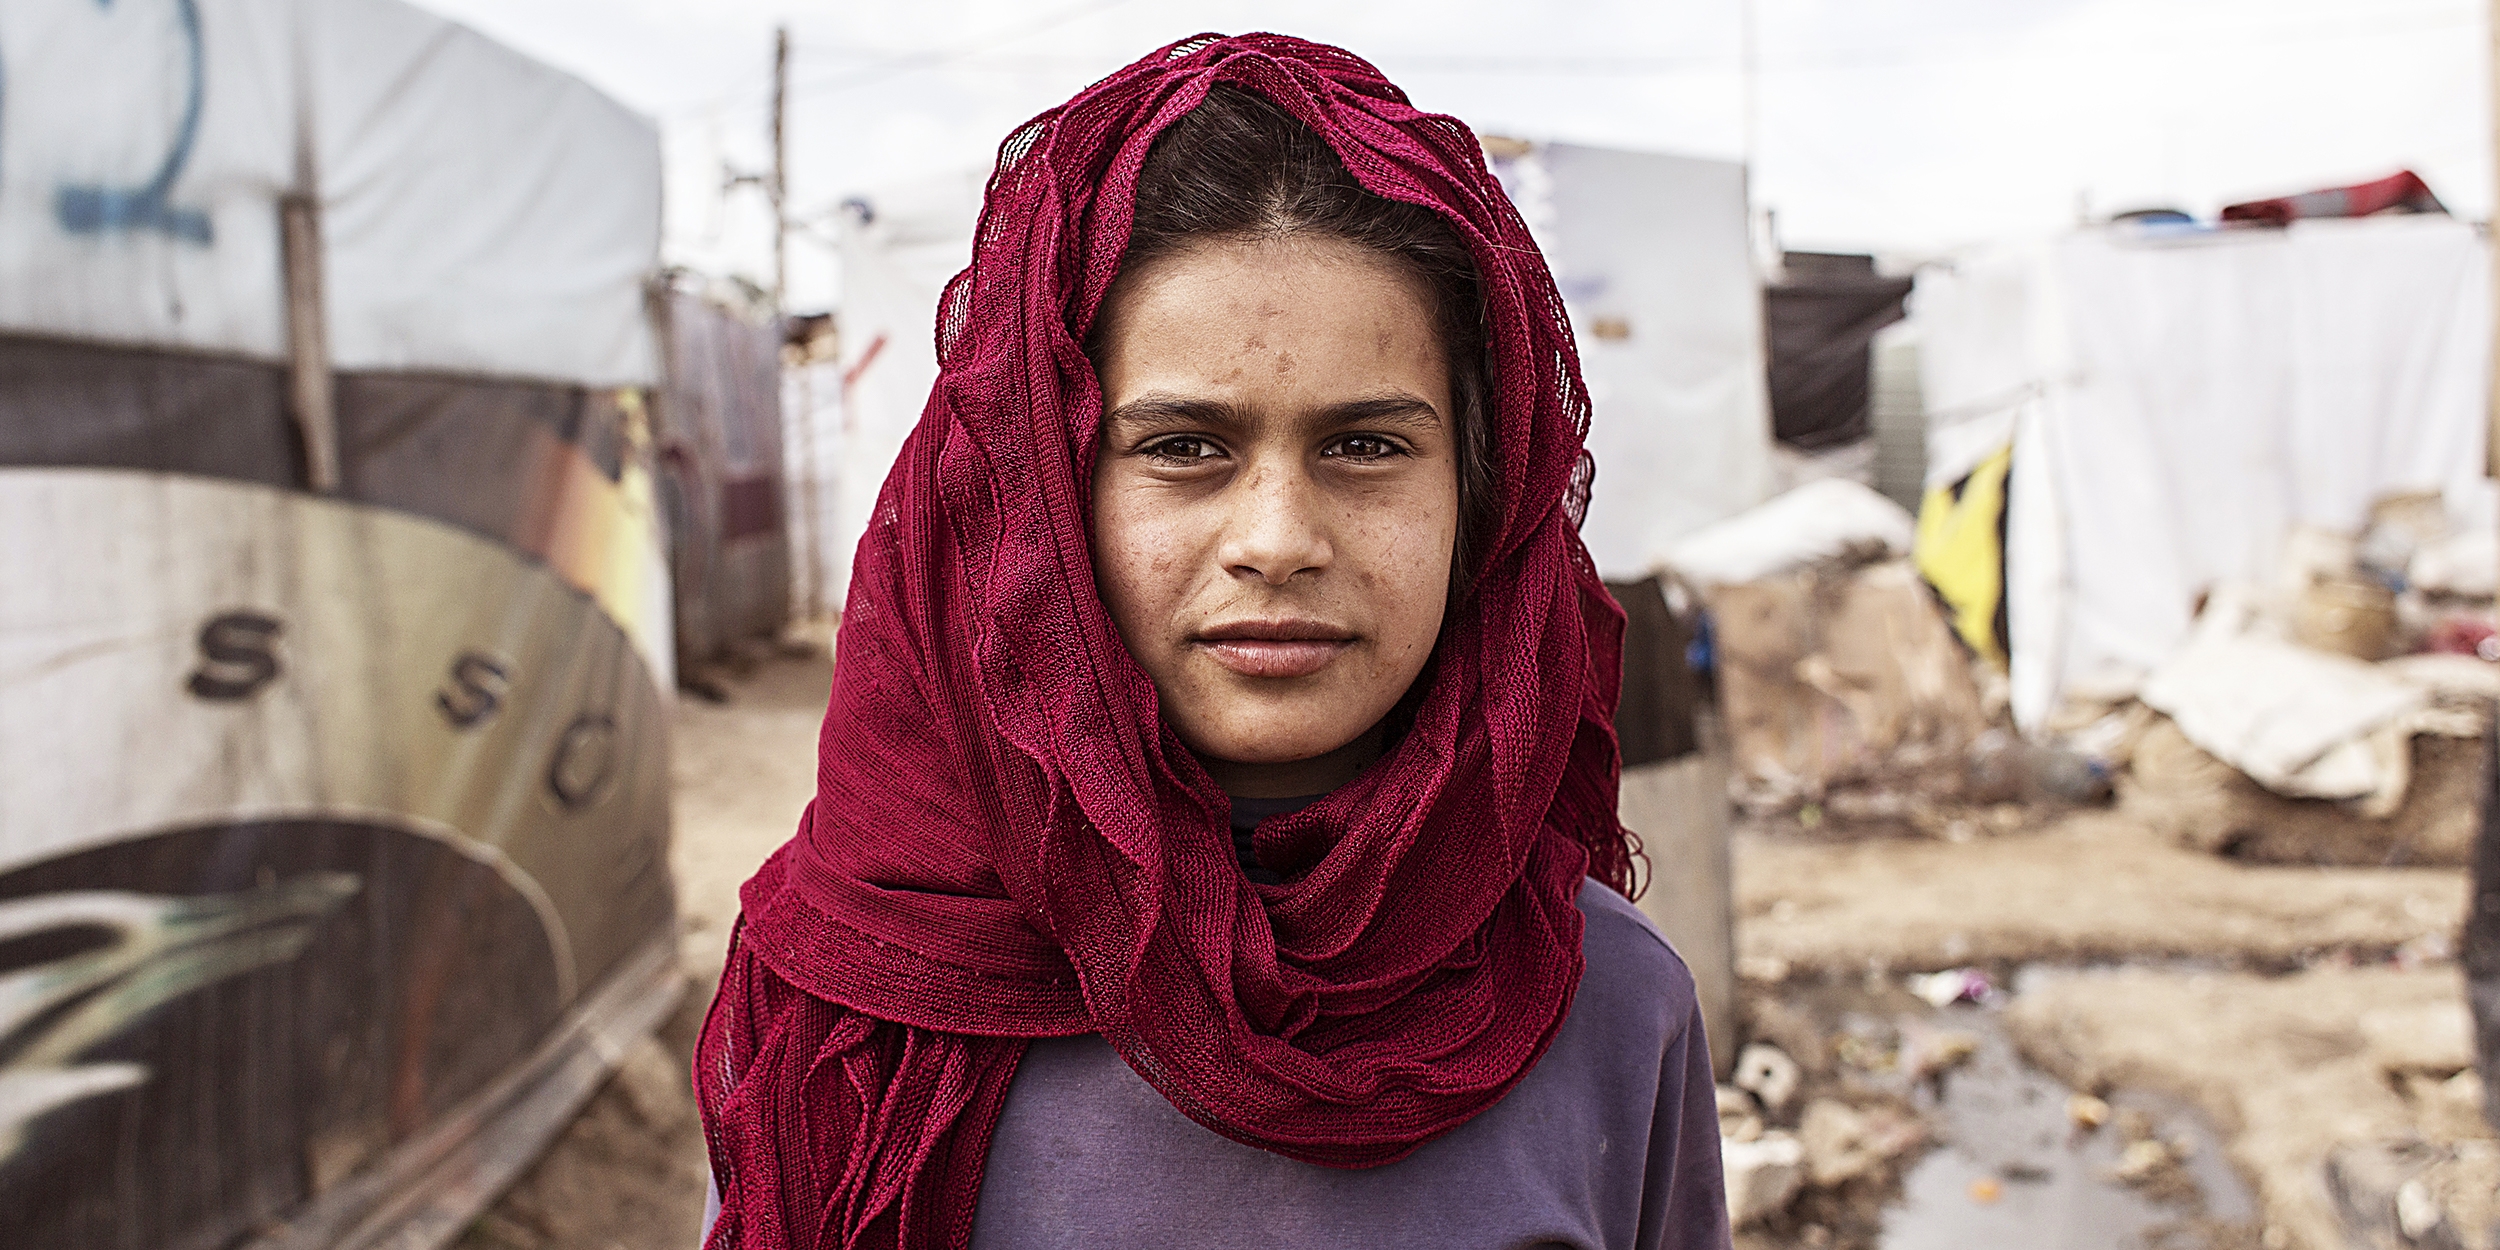 A 12-year-old Syrian girl, in the Anjar Refugee camp in Lebanon. Save the Children offers programs in the camp to help keep refugee children healthy, educated and safe.  